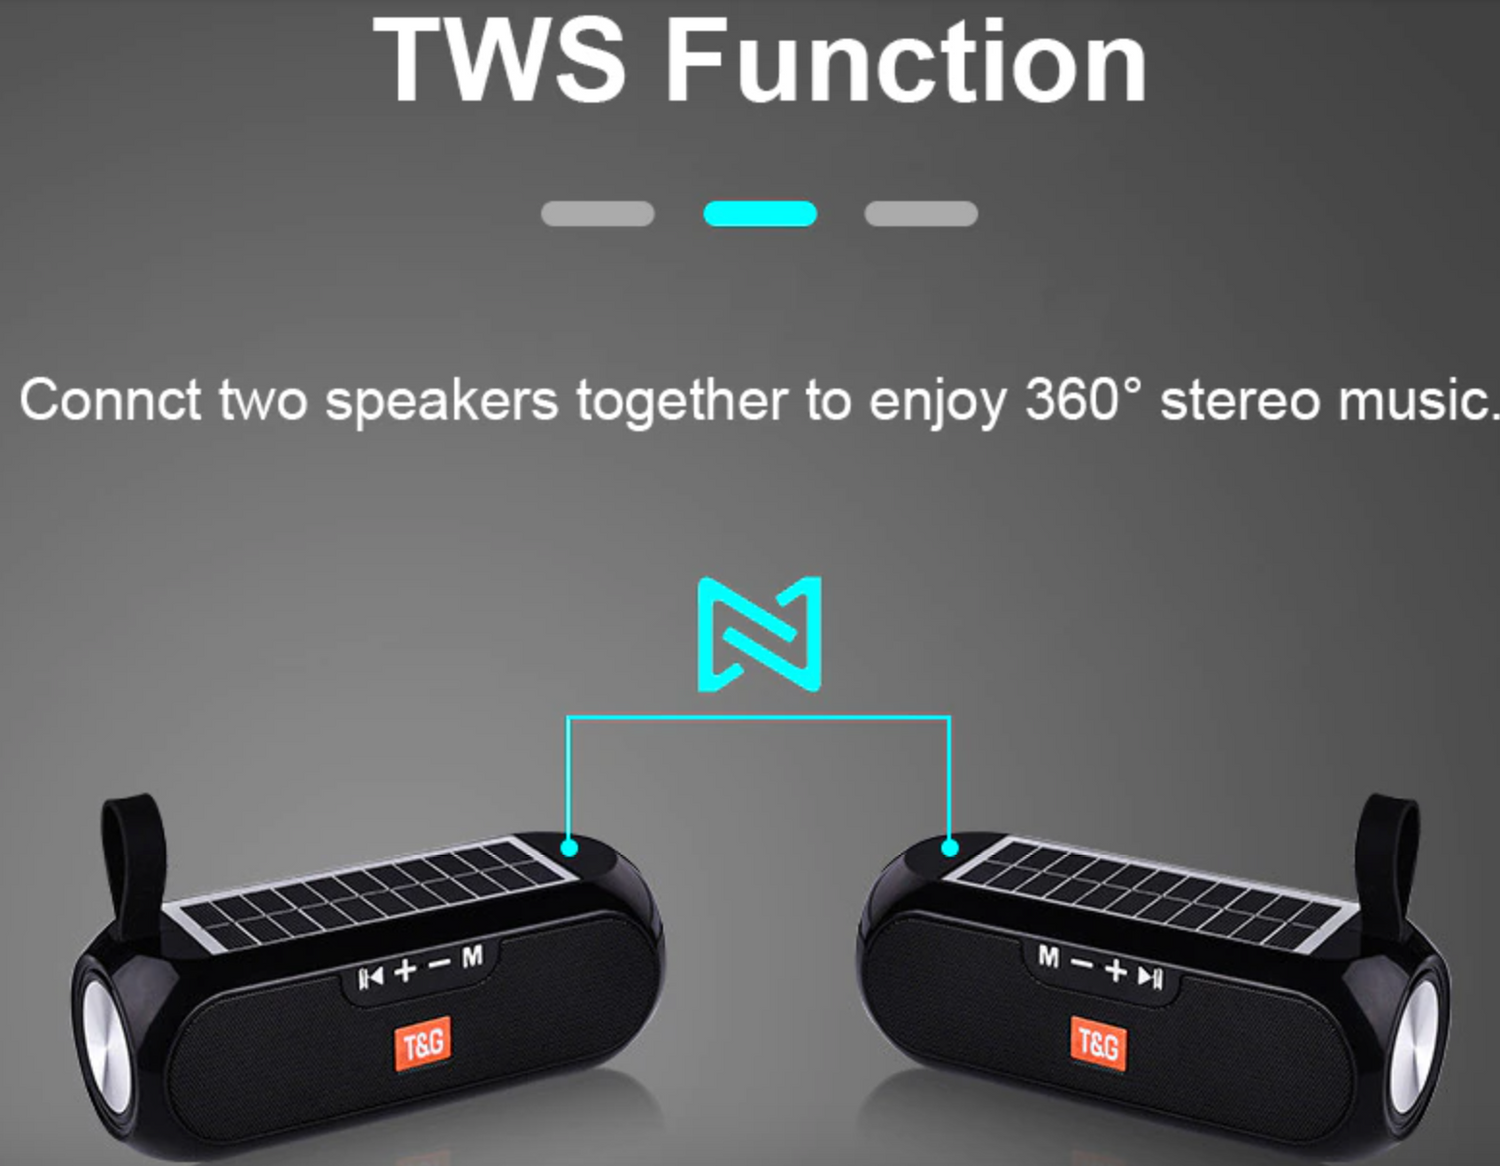 Image for two solar powered waterproof outdoor bluetooth speakers placed next to each other to show the TWS function which means they can be paired together for a better and combined stereo sound.